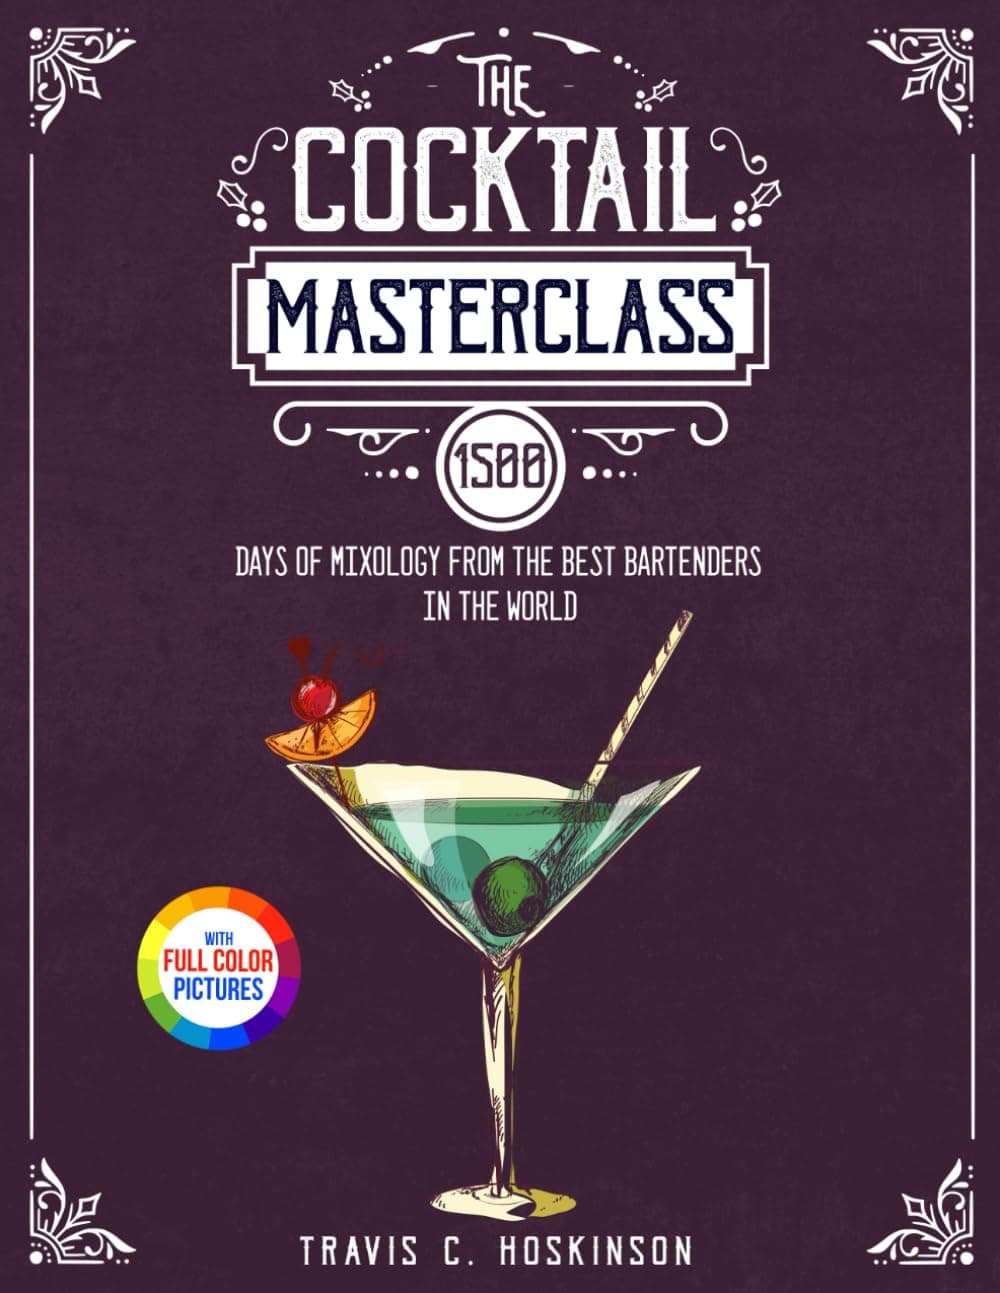 The Cocktail Masterclass (book)